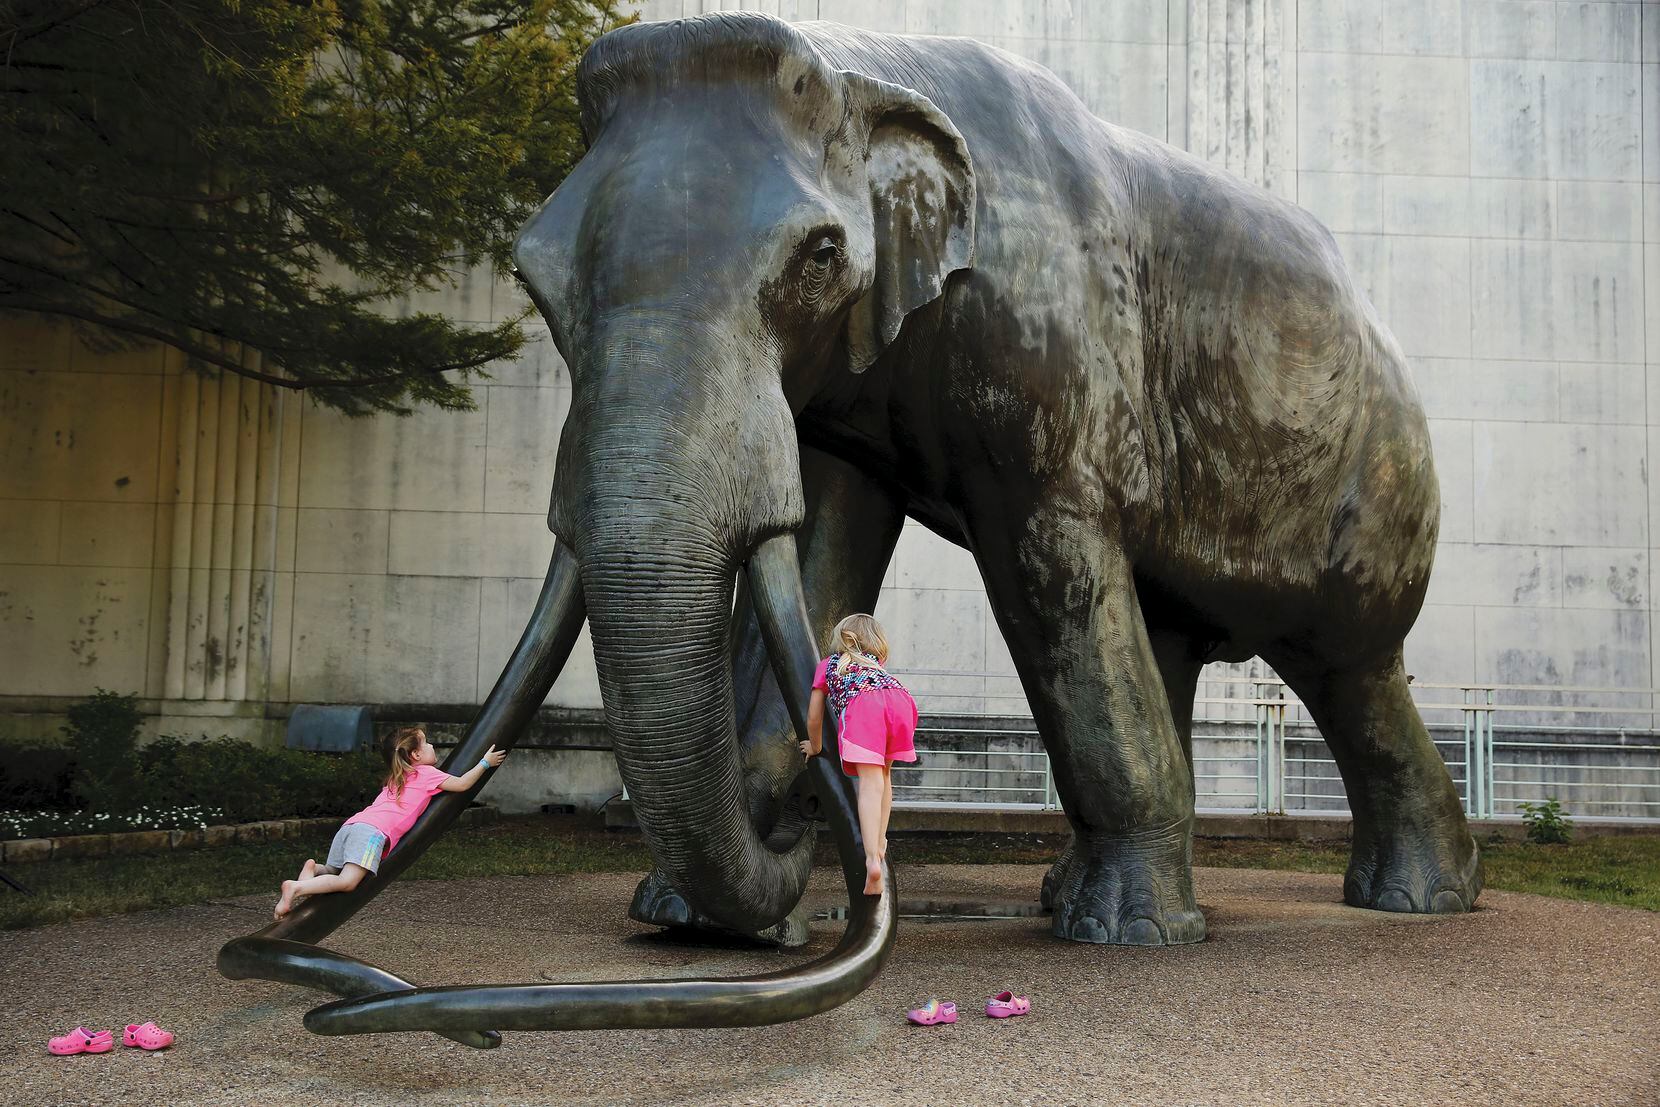 Erin (left), 3, and her sister Ella, 5, of Waxahachie climb on an elephant statue outside the Dallas Museum of Natural History at Fair Park in Dallas.